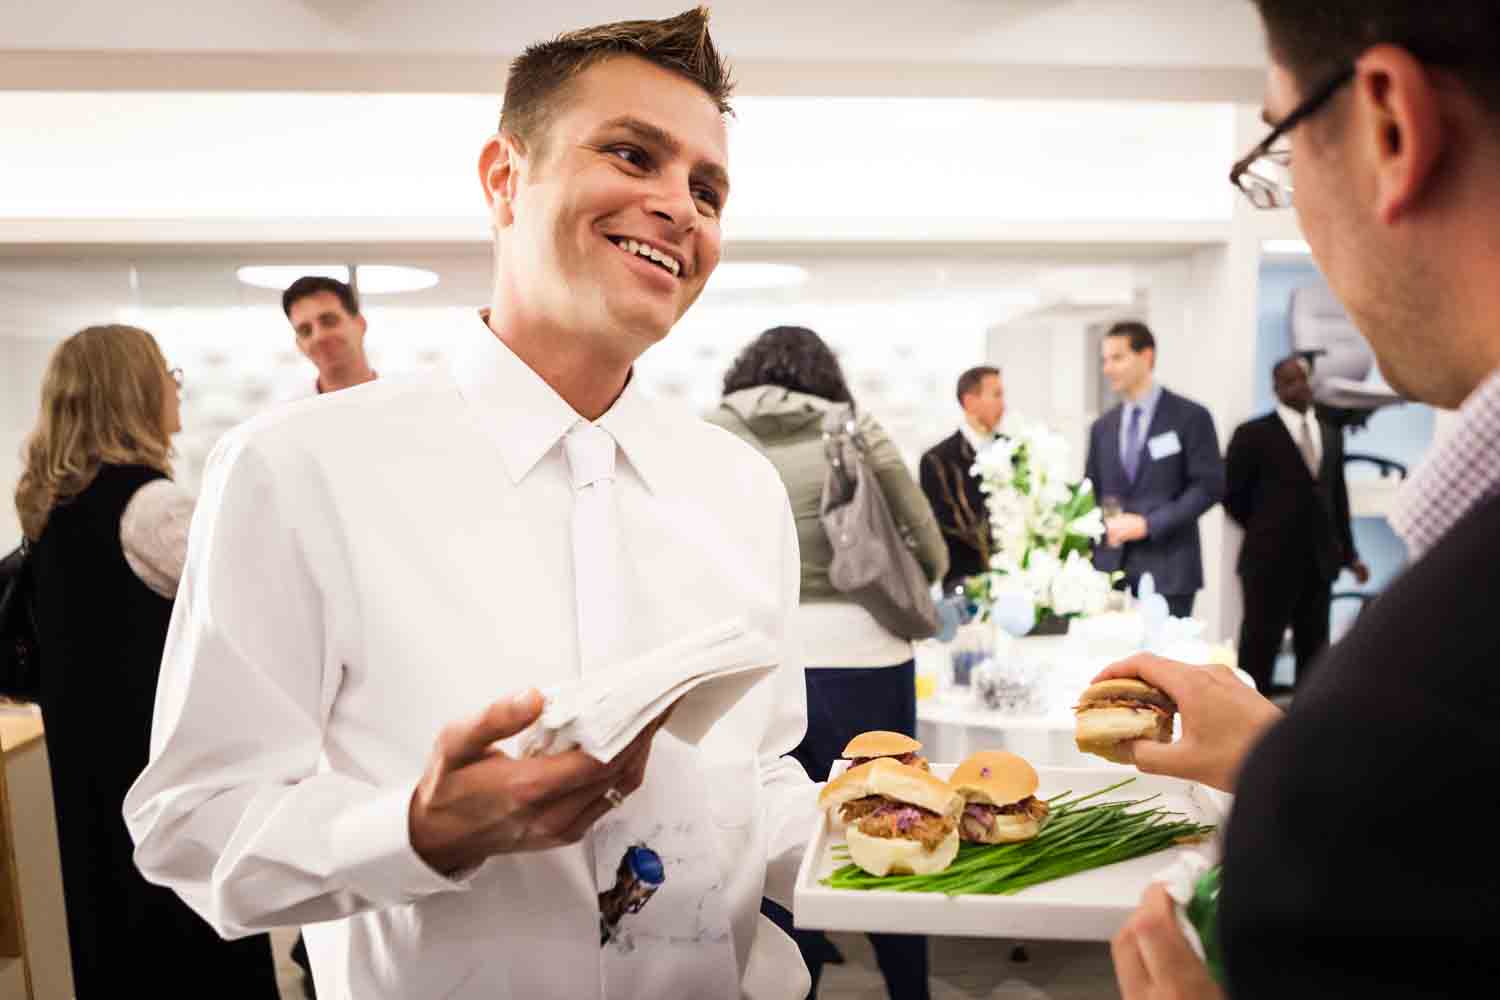 Waiter offering appetizers to a guest for an article on corporate event planning tips